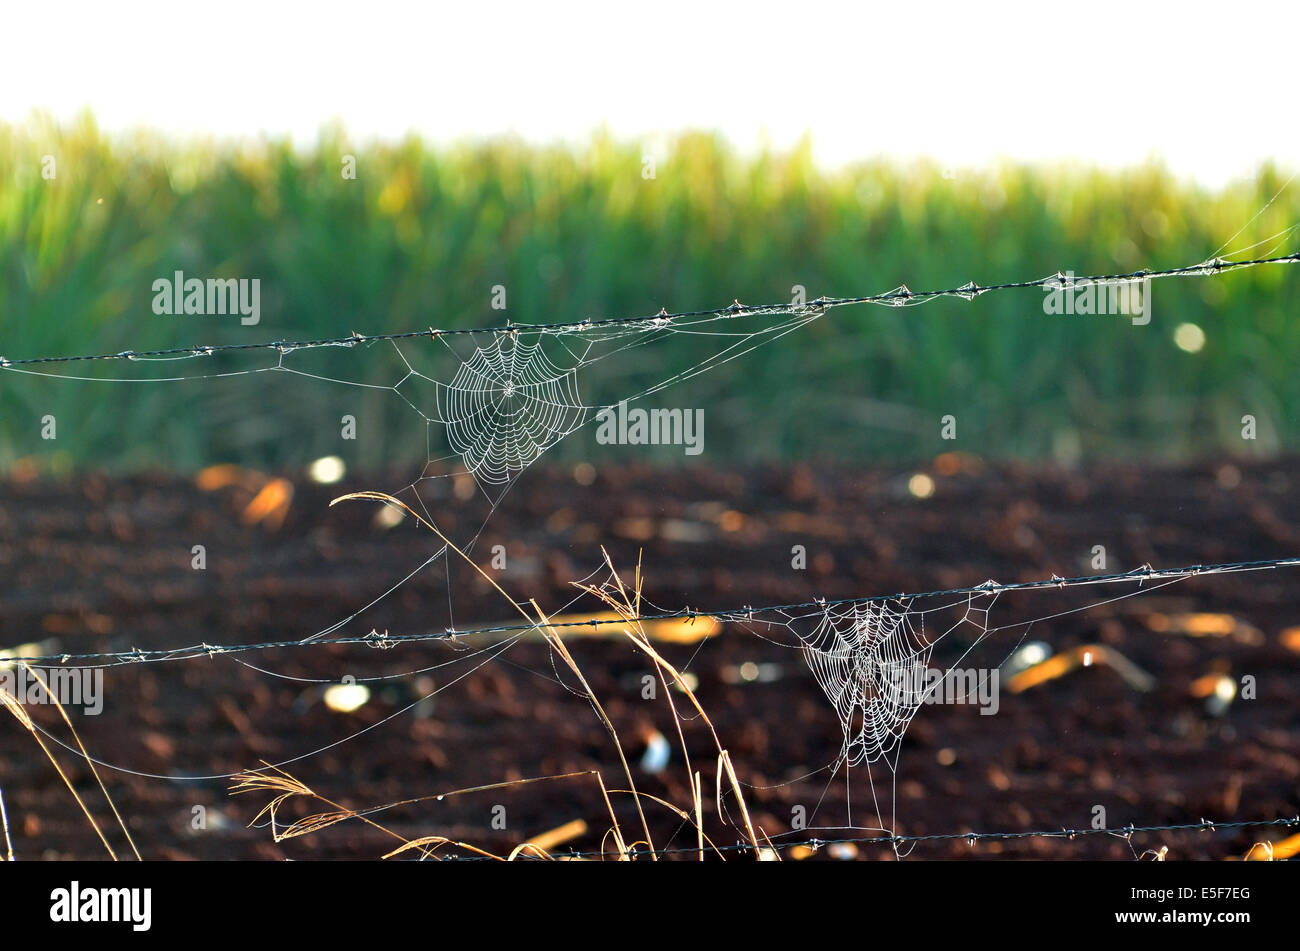 Cobwebs on a barbed wire fence Stock Photo